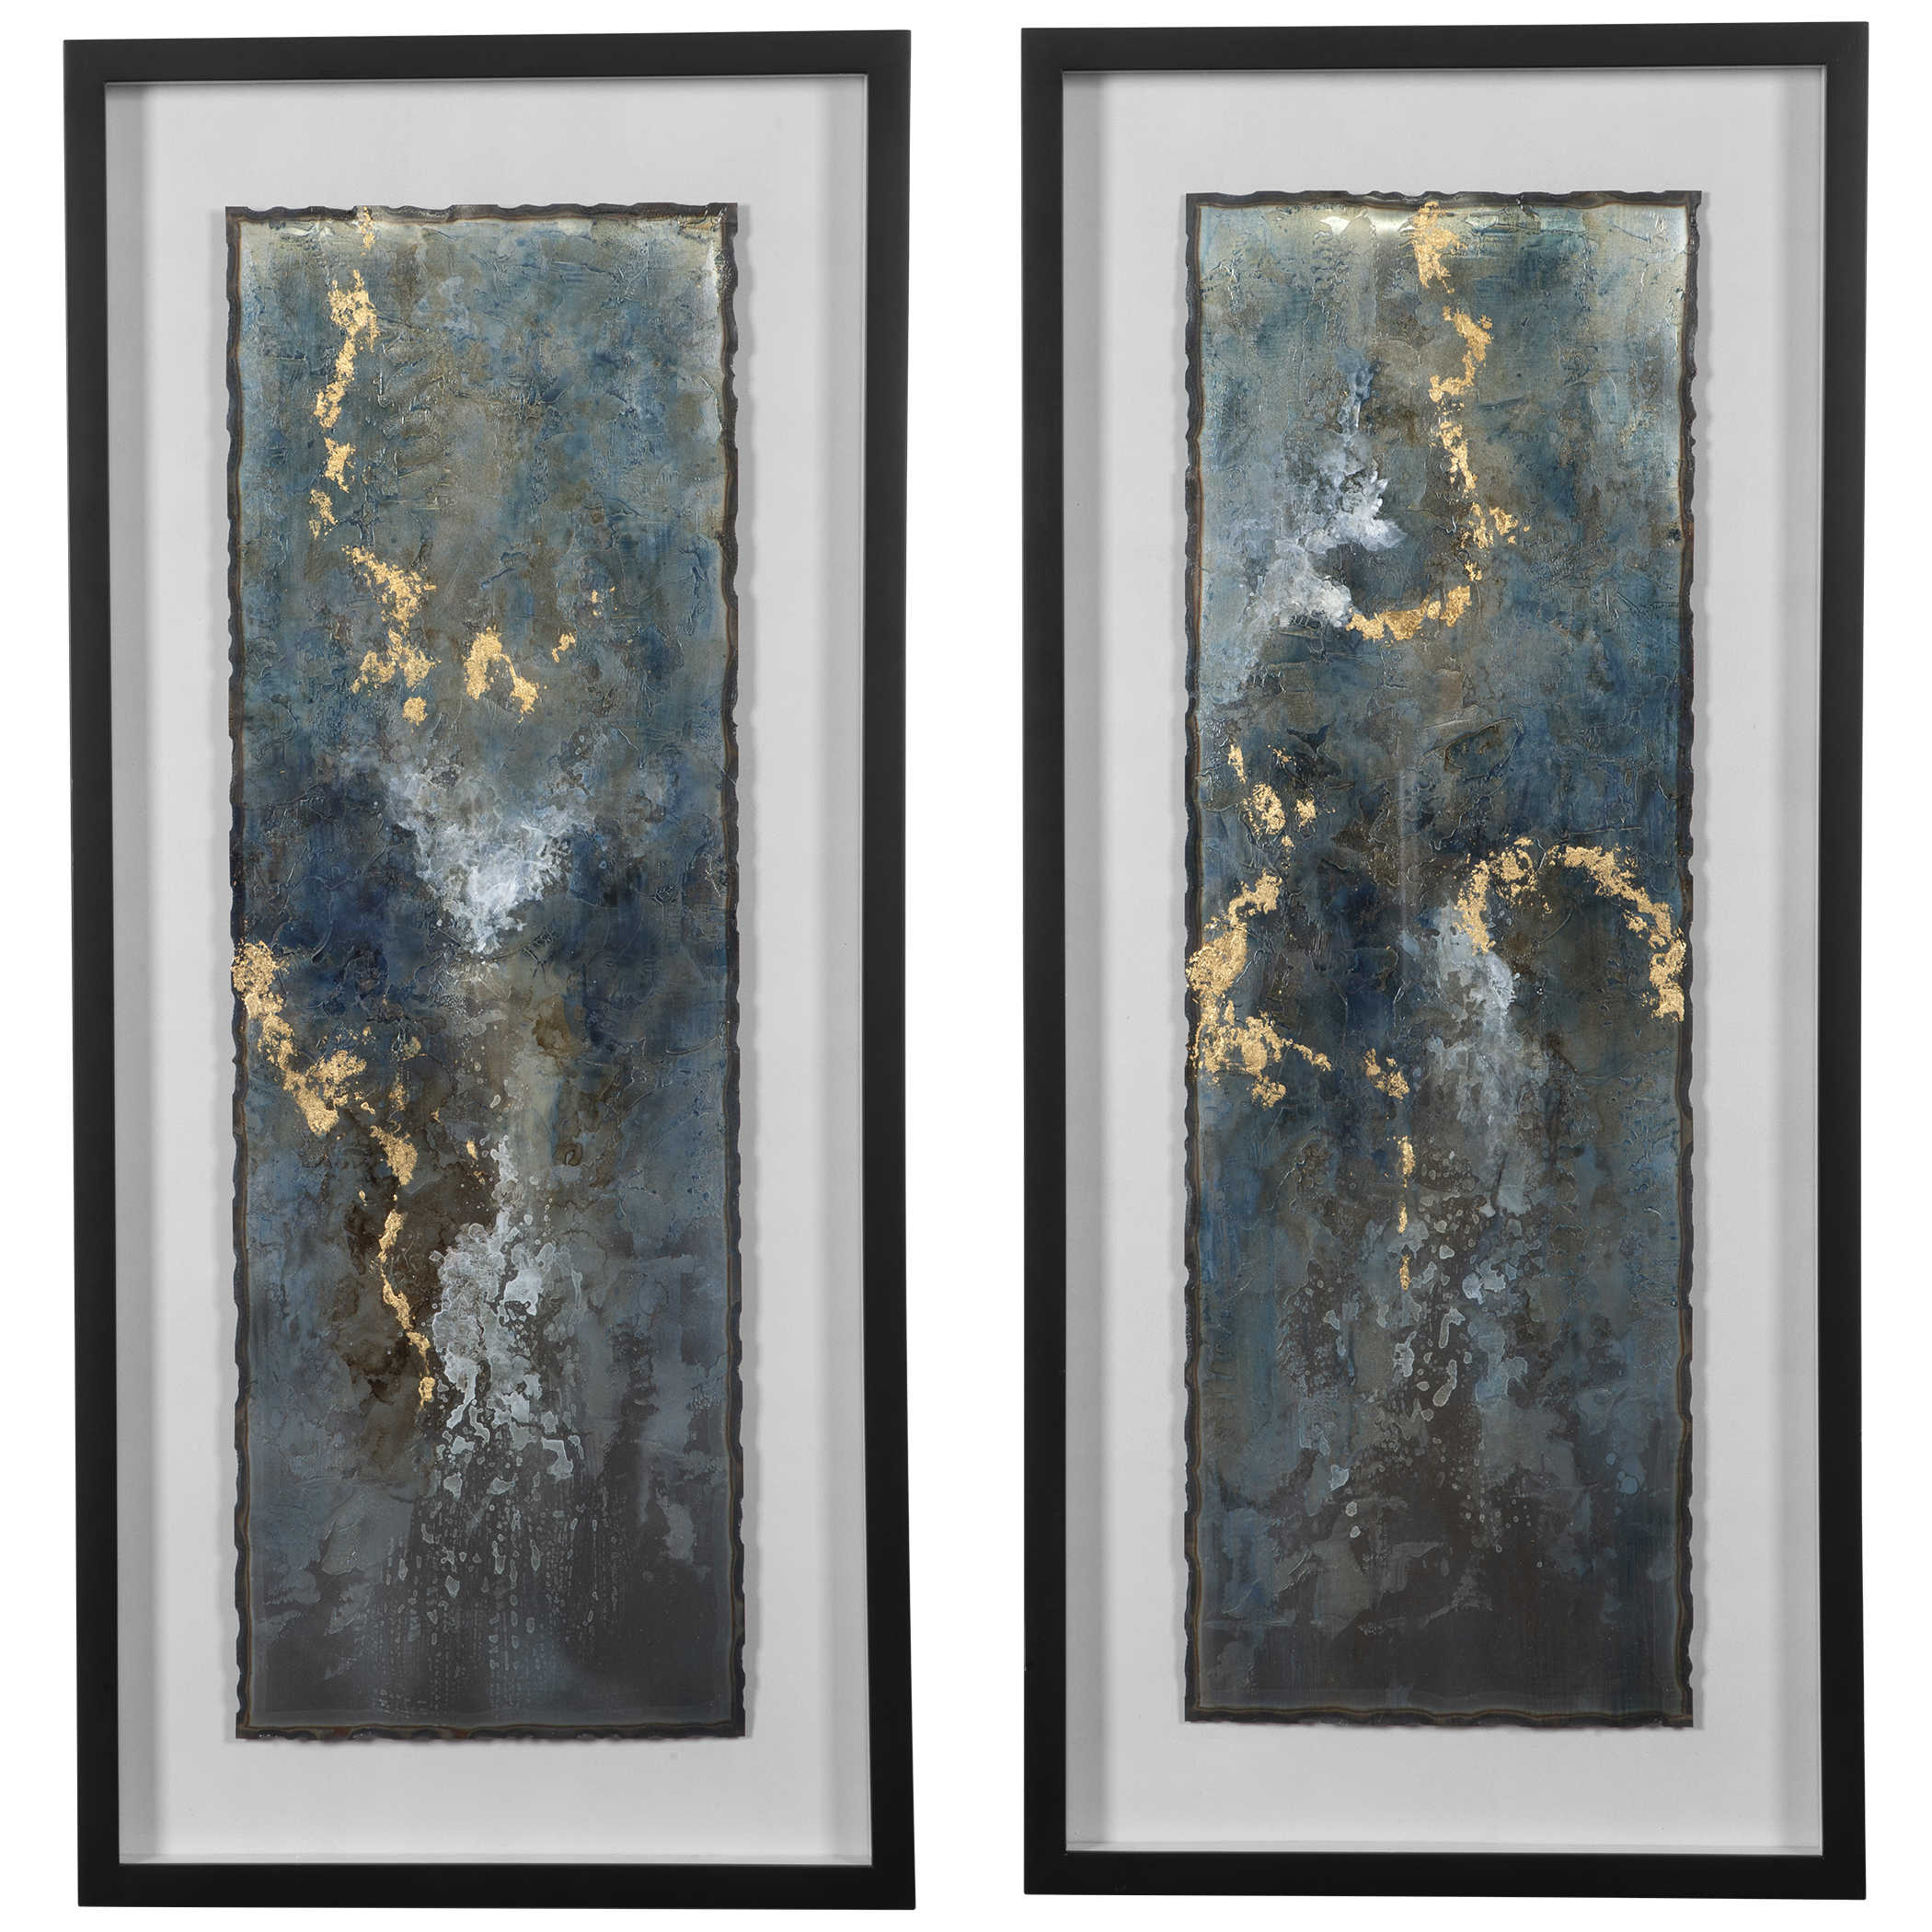 Uttermost Glimmering Agate Abstract Prints, S/2 Décor/Home Accent Uttermost MDF,IRON,PINE,GLASS  